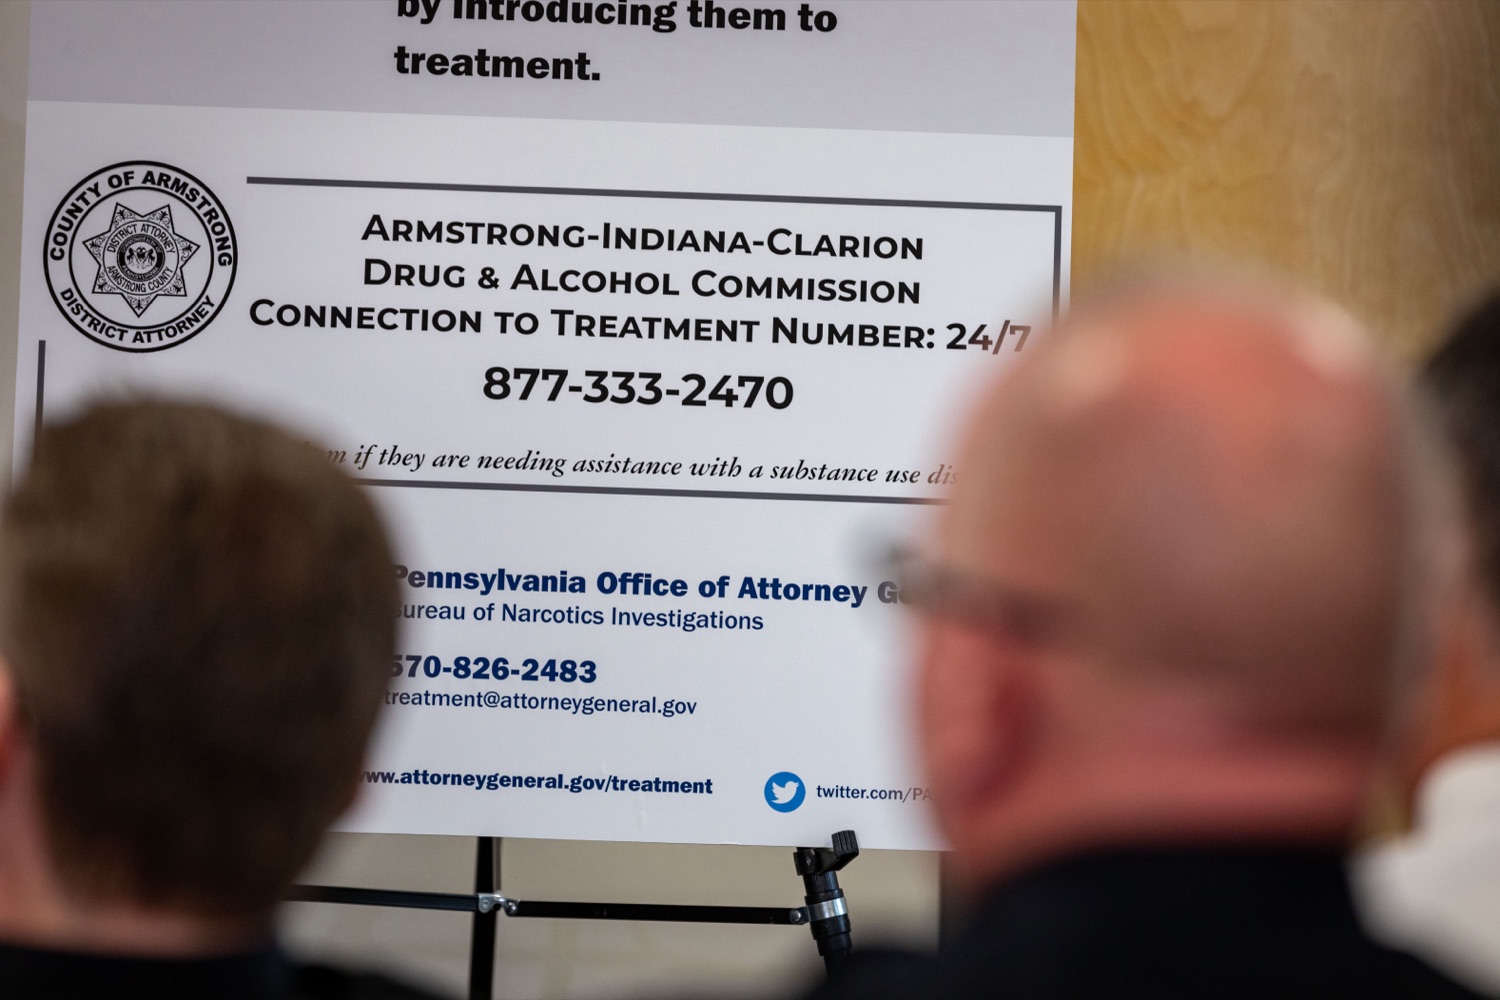 Attorney General Michelle Henry announces the expansion of the Law Enforcement Treatment Initiative (LETI) in Armstrong County. PA LETI is a law enforcement-led treatment initiative that will allow Pennsylvanians in Armstrong County seeking treatment for substance use disorder to use their local law enforcement, county officials, and community stakeholders, to contact the Armstrong-Indiana-Clarion Drug and Alcohol Commission for treatment services without the threat of arrest..<br><a href="https://filesource.amperwave.net/commonwealthofpa/photo/24312_oag_armstrongLETI_sc_02.jpg" target="_blank">⇣ Download Photo</a>